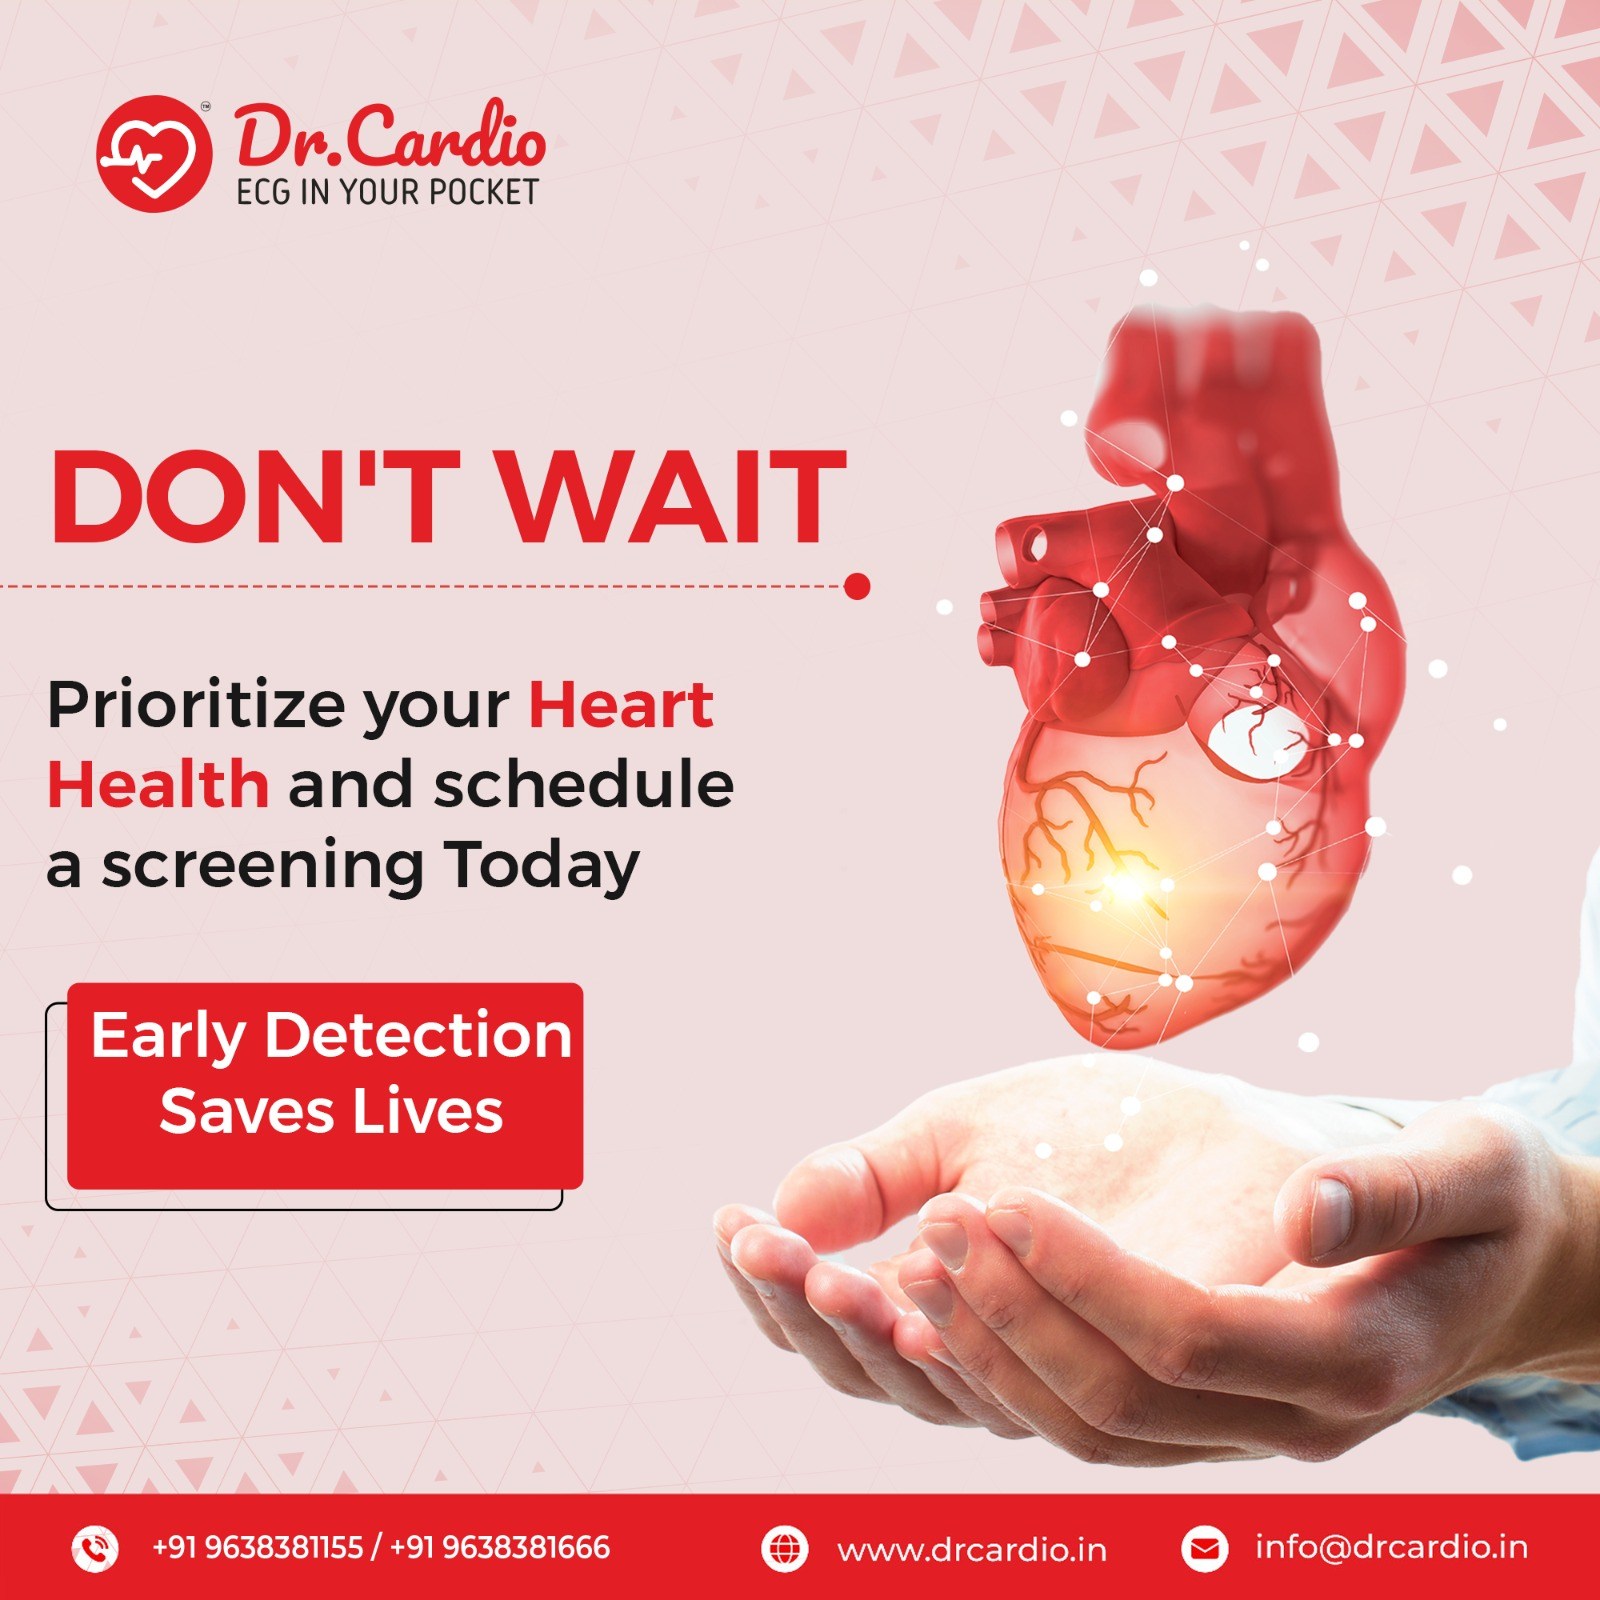 Prioritize Your Heart Health with Dr. Cardio's Proactive Heart Screening